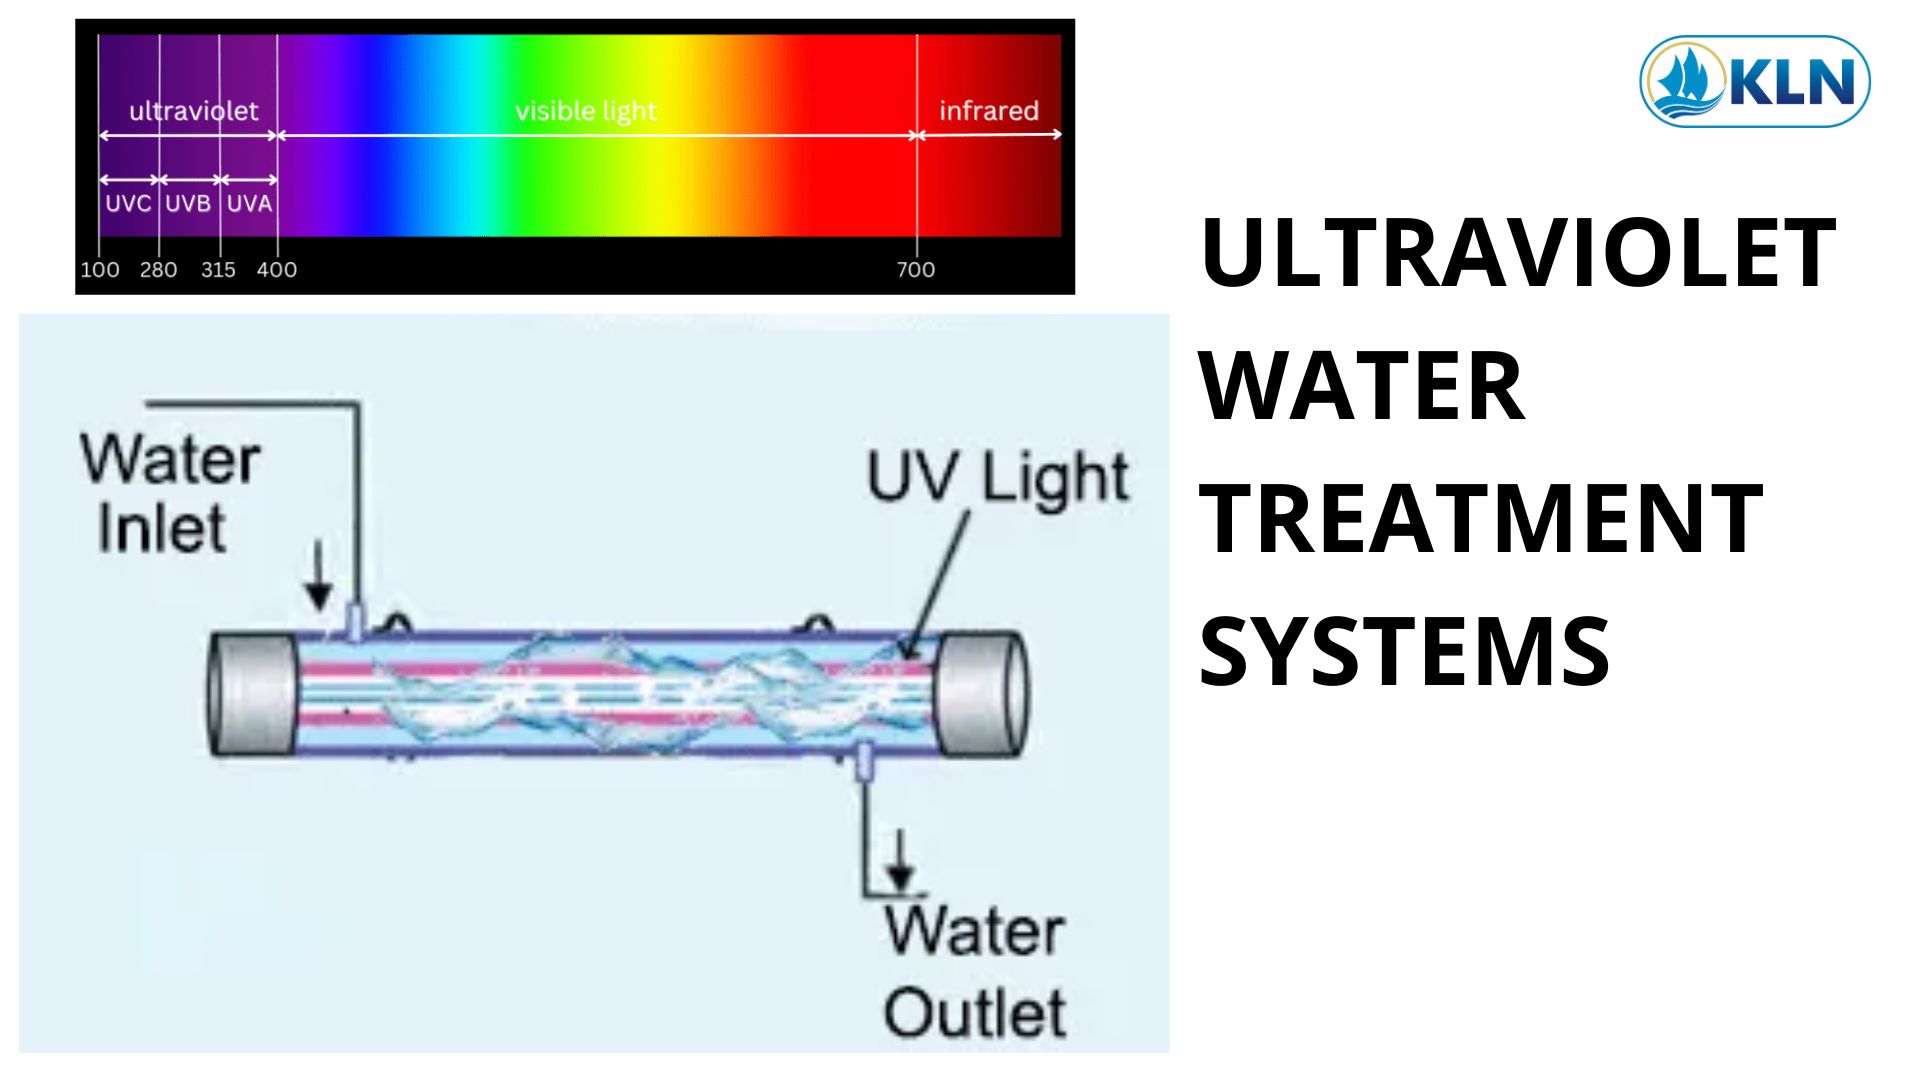 ULTRAVIOLET WATER TREATMENT SYSTEMS